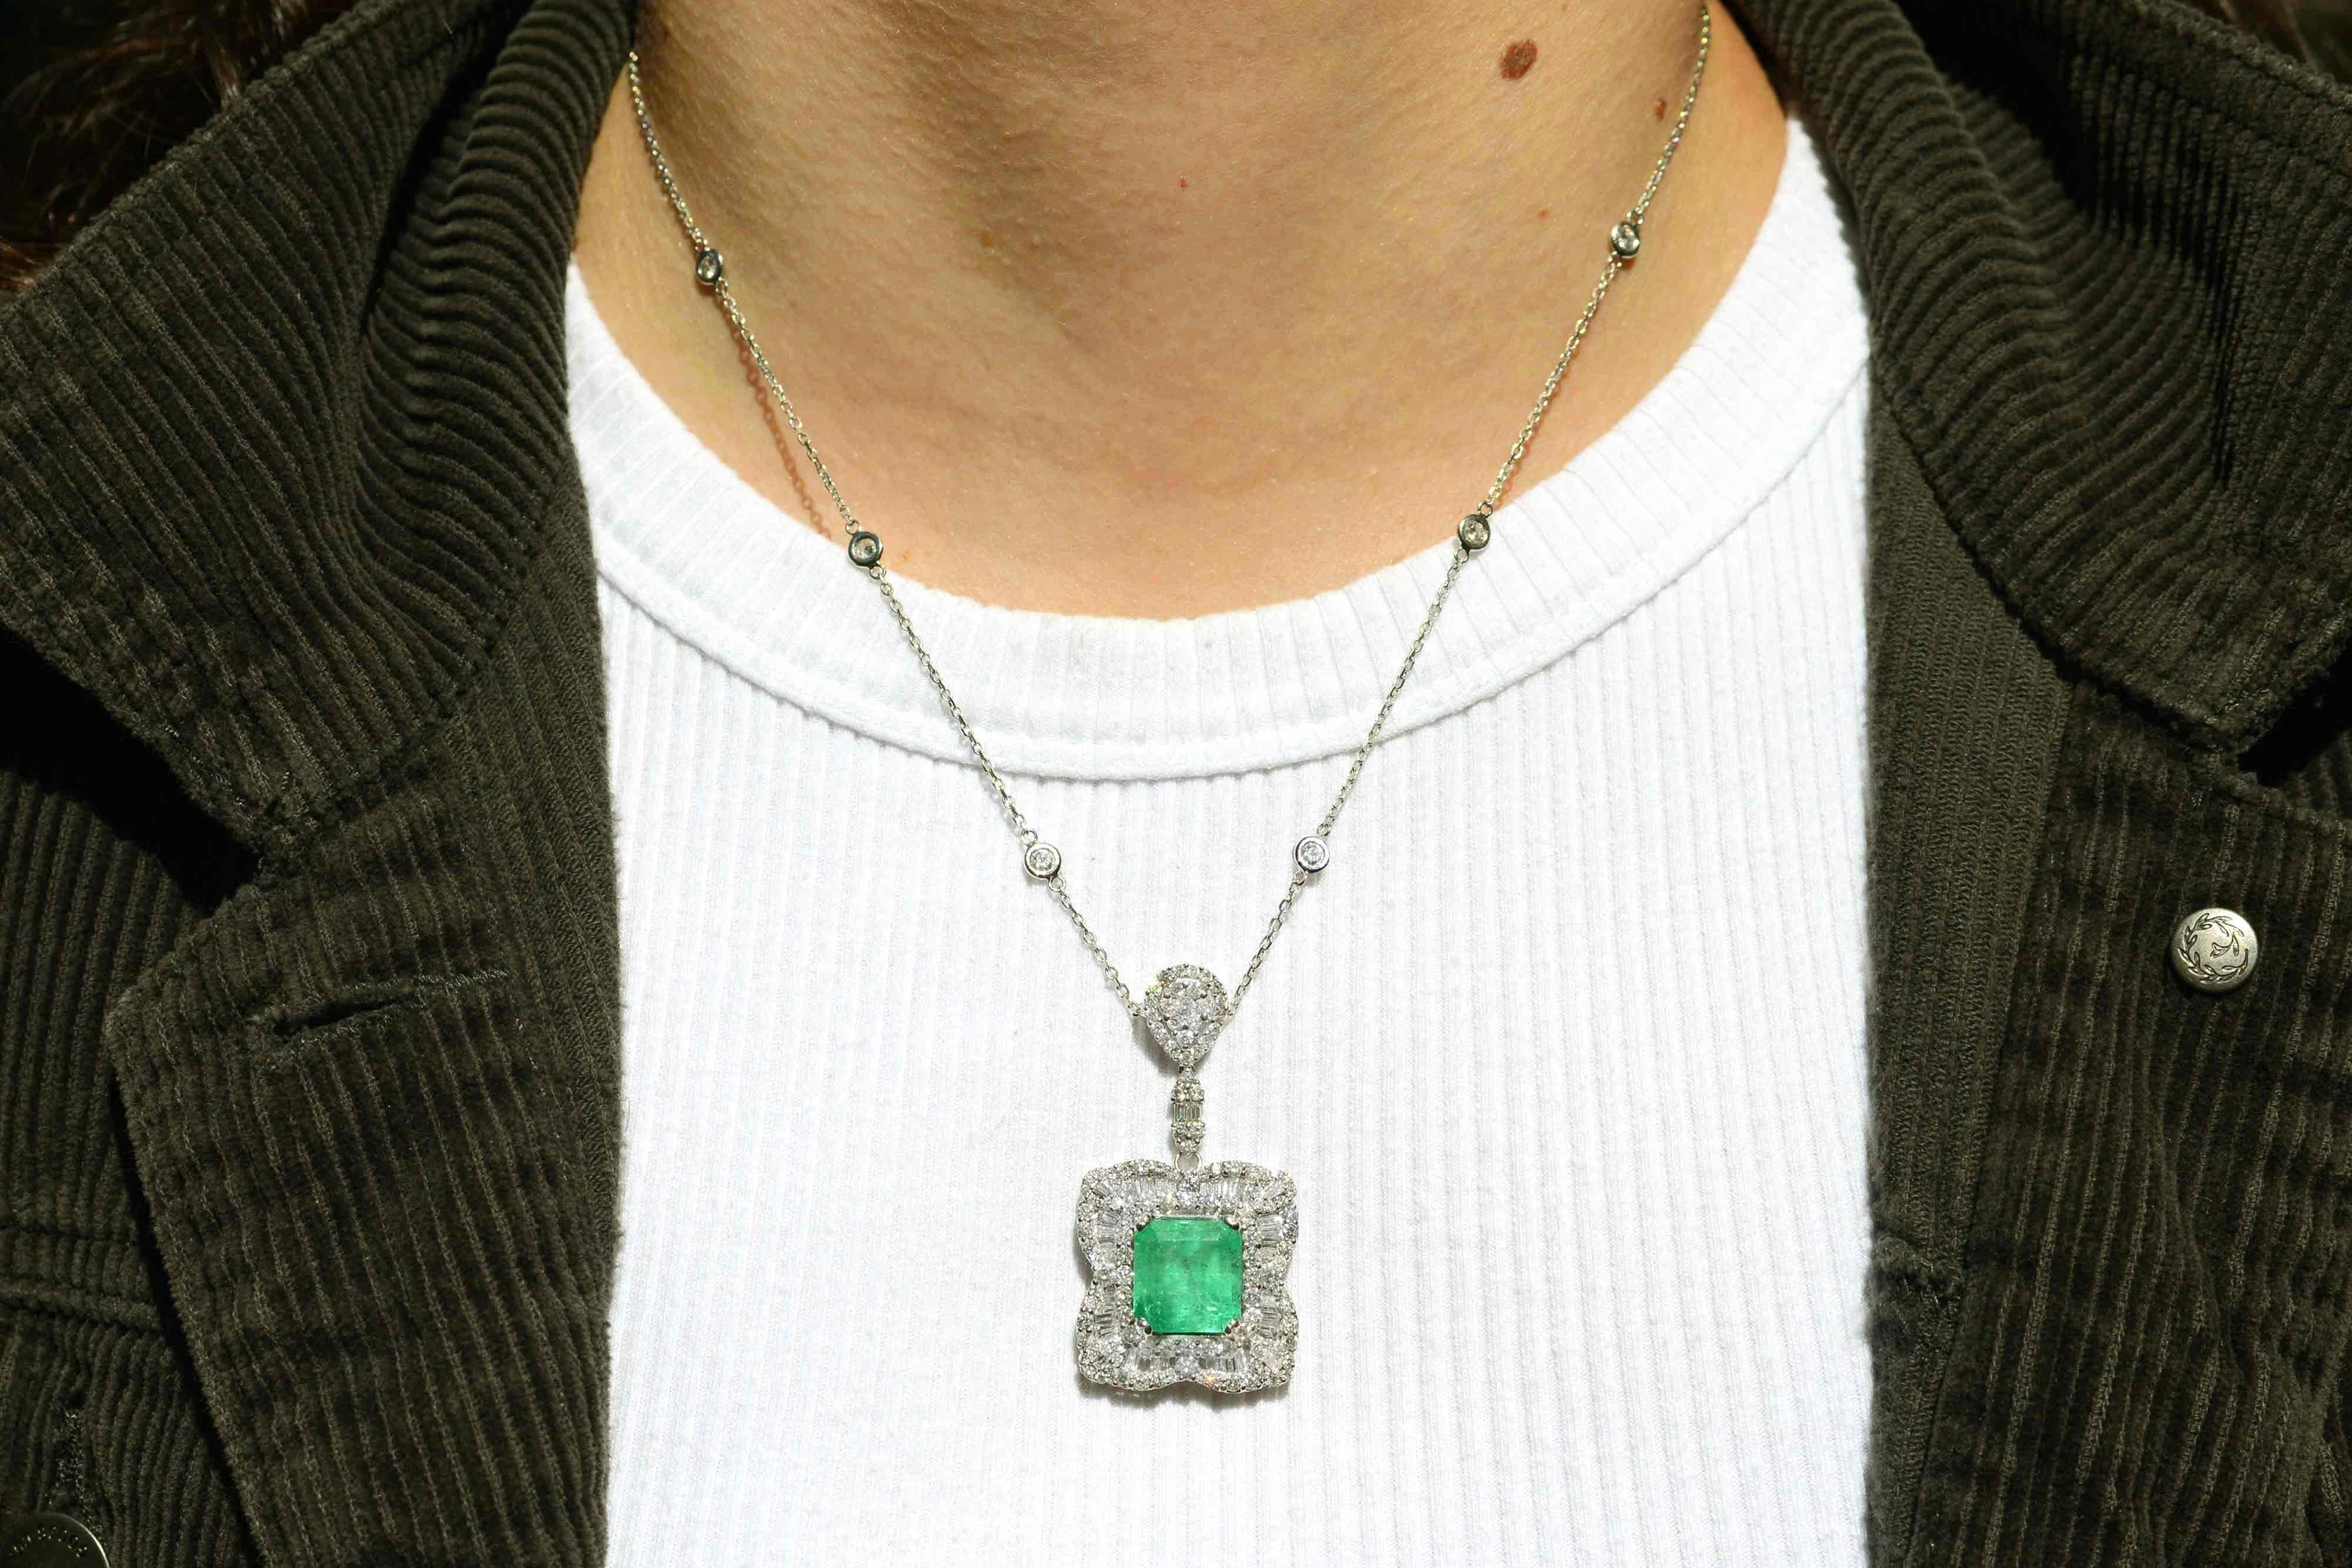 The Meagan emerald and diamond pendant necklace makes a glorious statement. The central gemstone of nearly 8 carats glows with a vivid green fire from within its soul and is smartly surrounded by 3 carats of glittering and fiery baguette and round